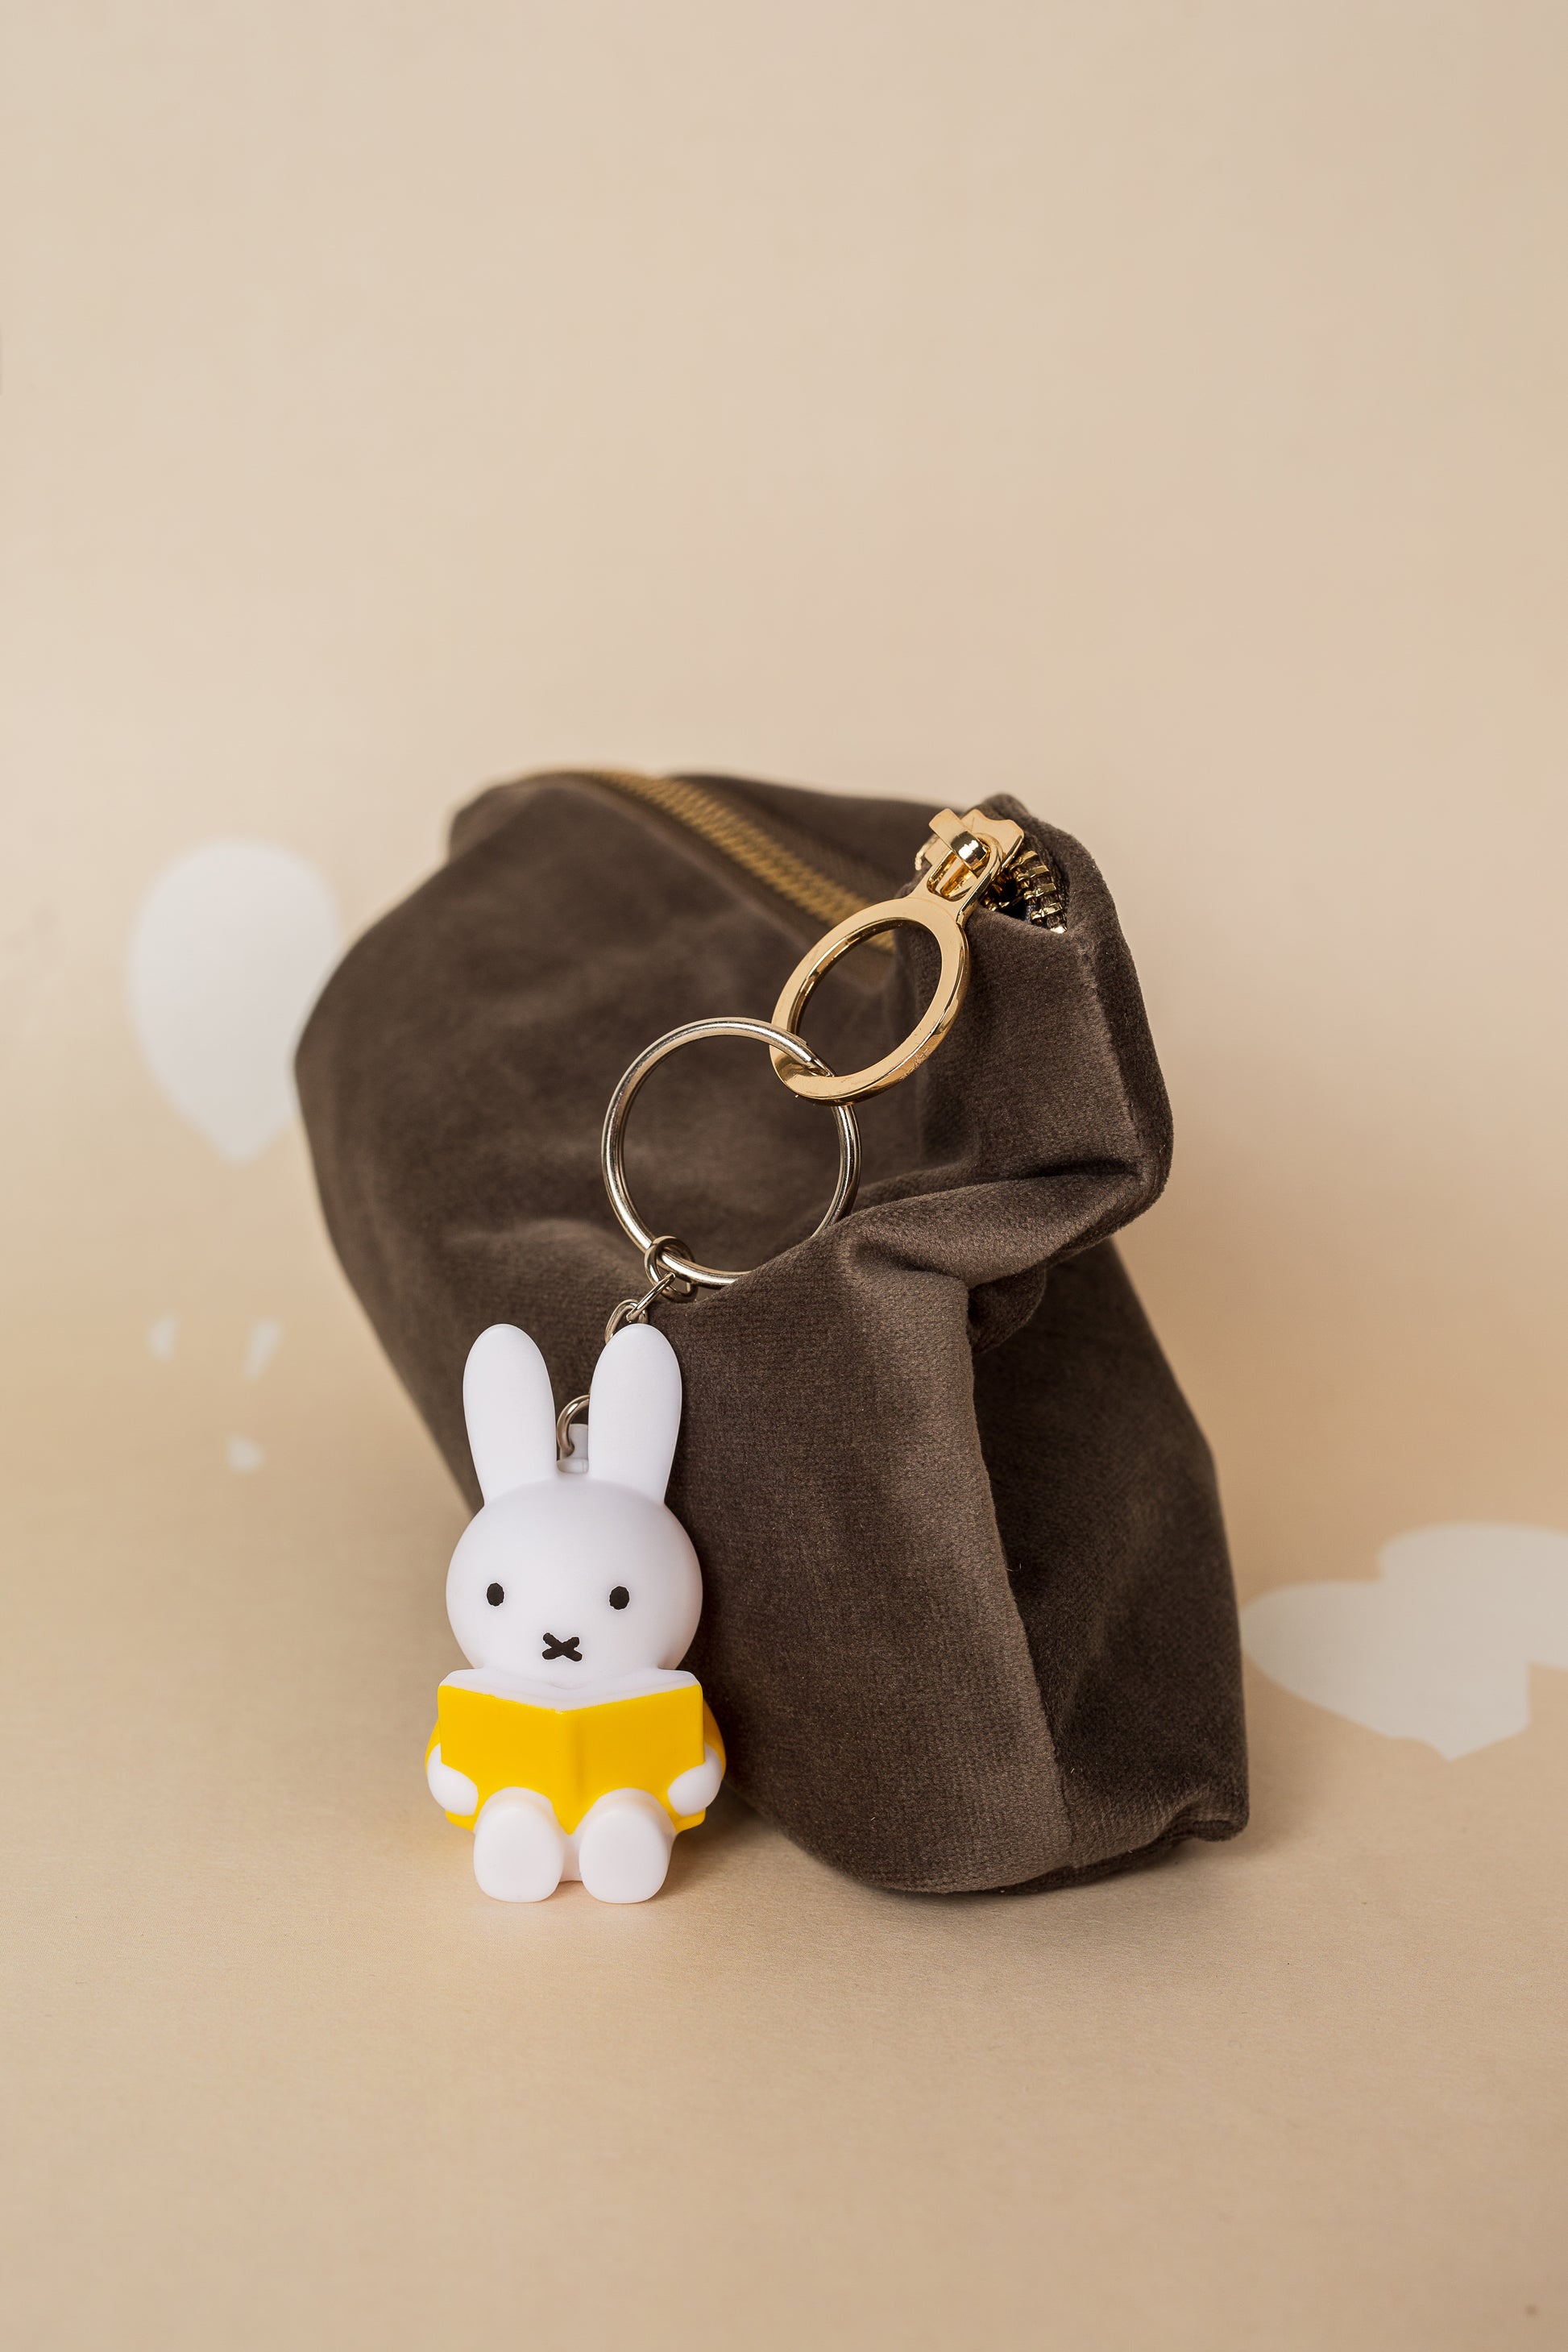 Miffy Atelier Pierre Key Chains 6 Colors Original Licensed Product